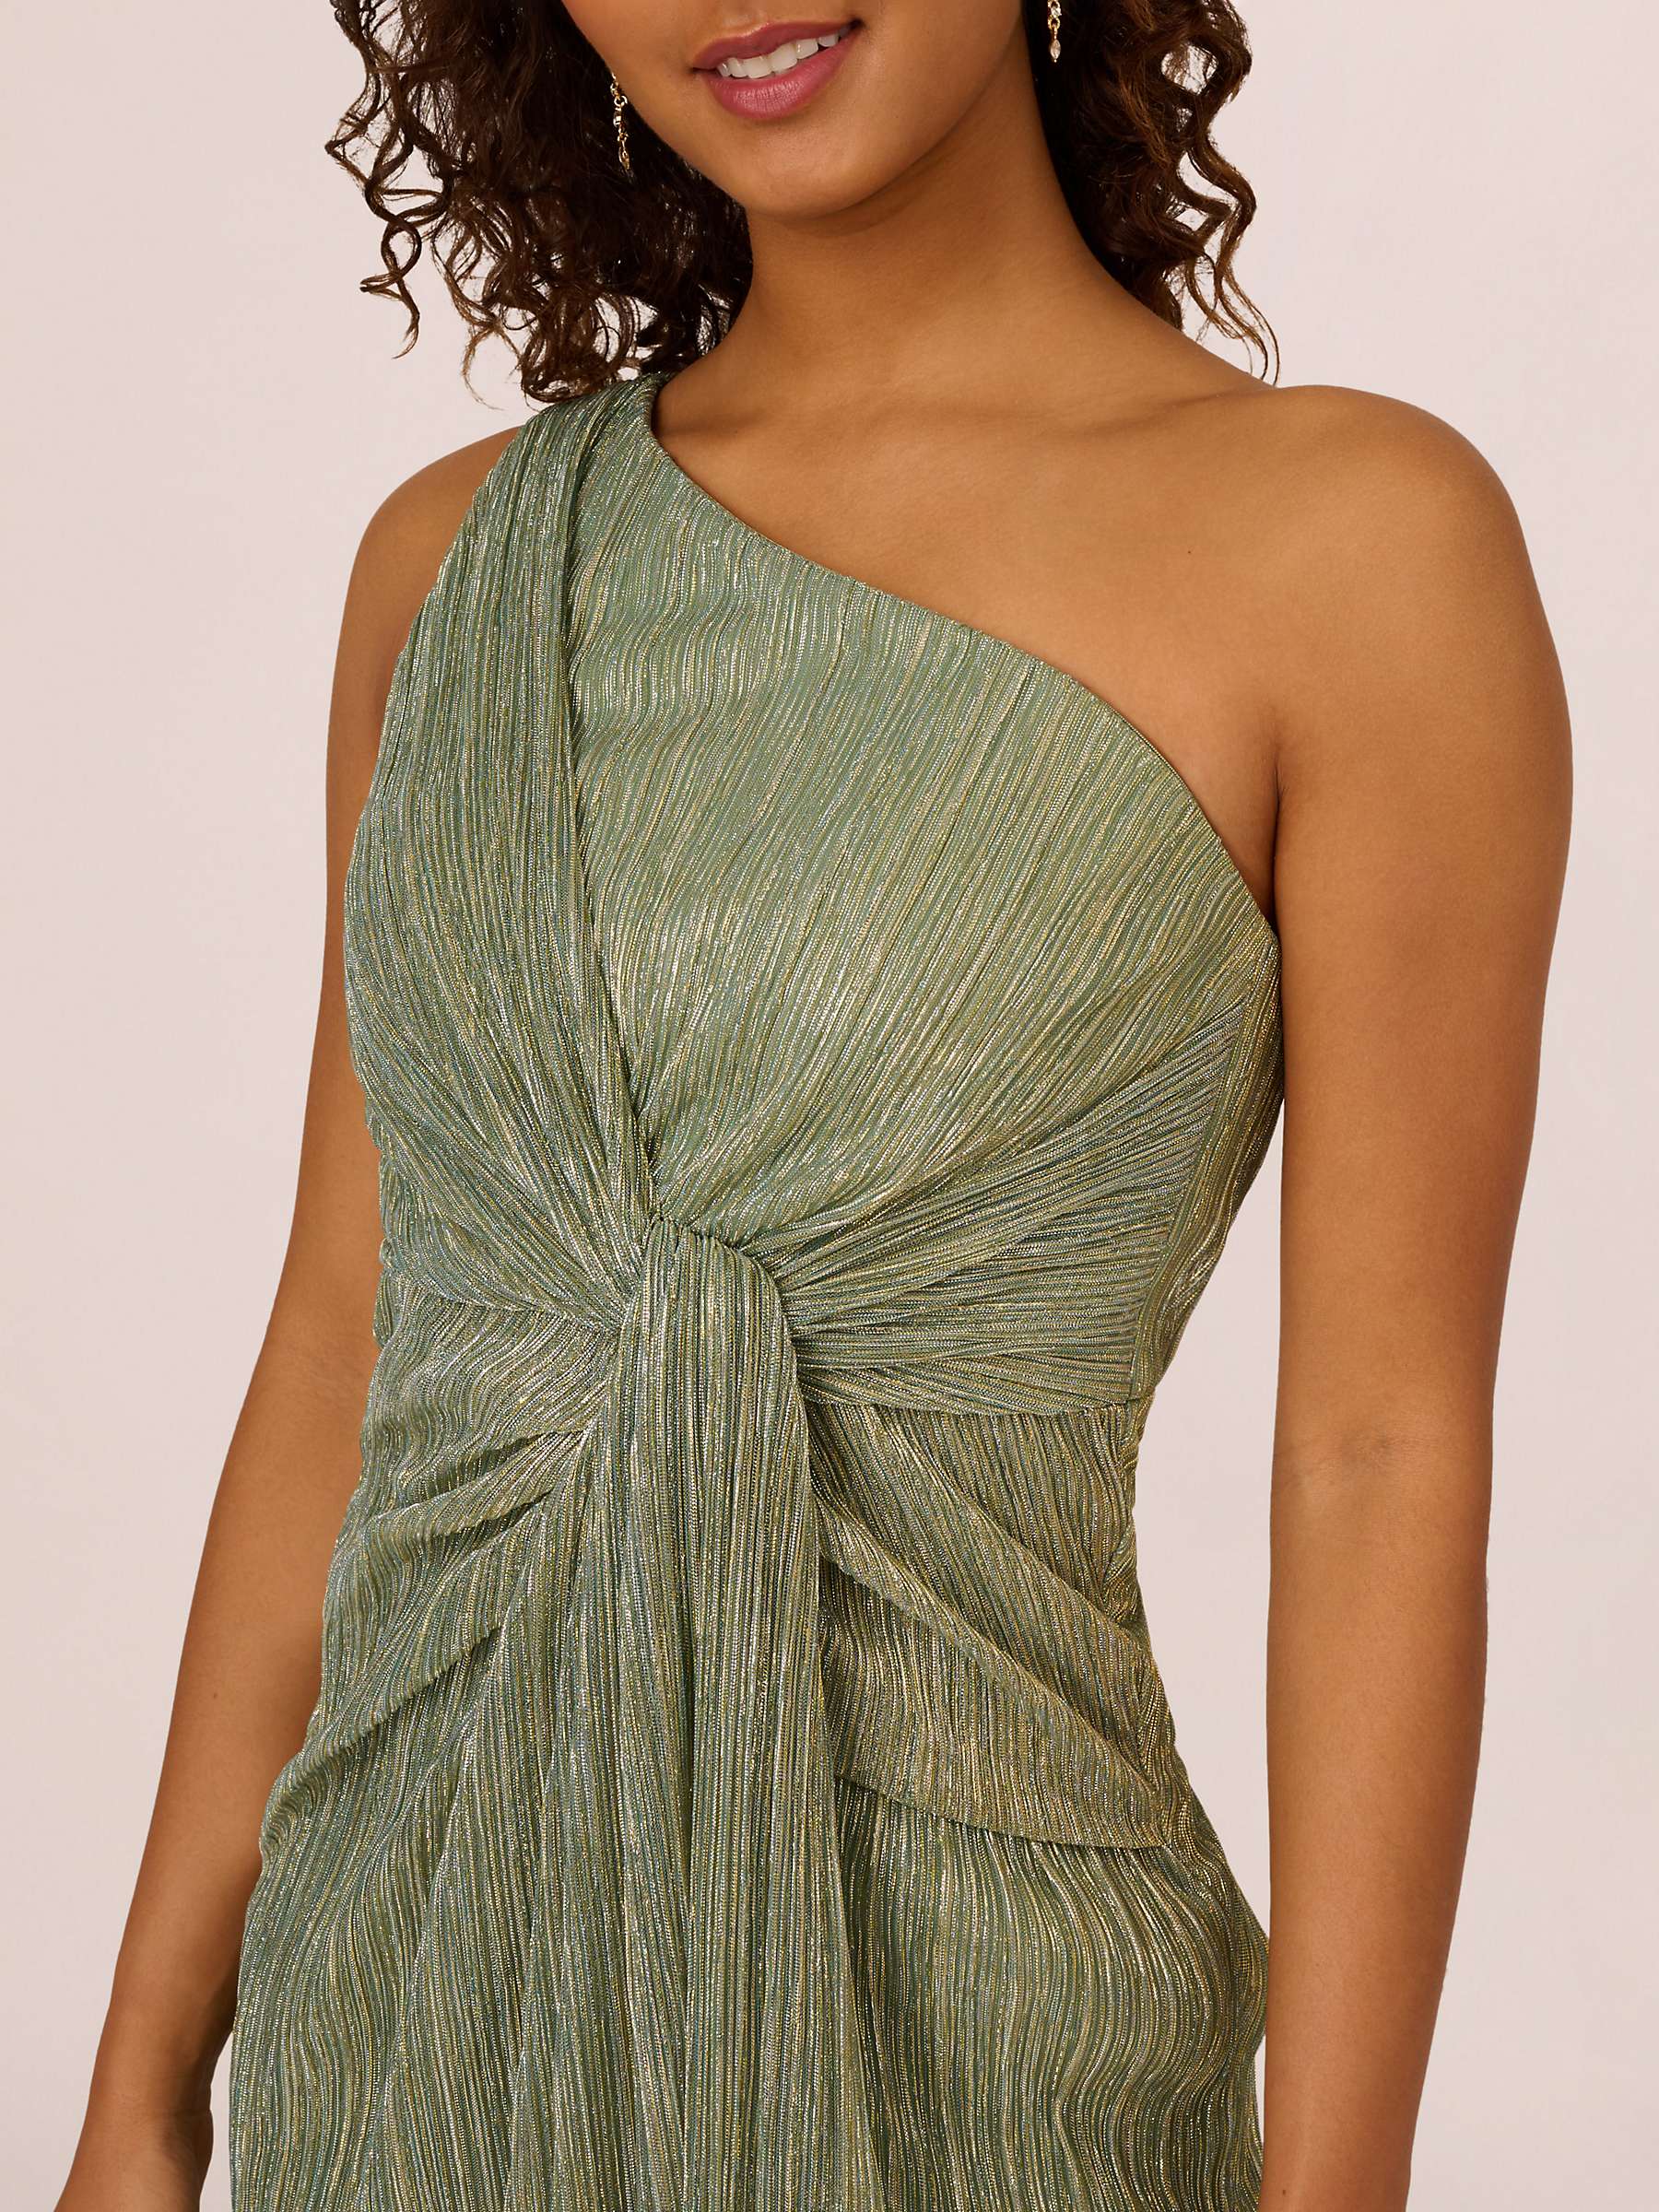 Buy Adrianna Papell Stardust Pleated One Shoulder Maxi Dress, Green Slate Online at johnlewis.com